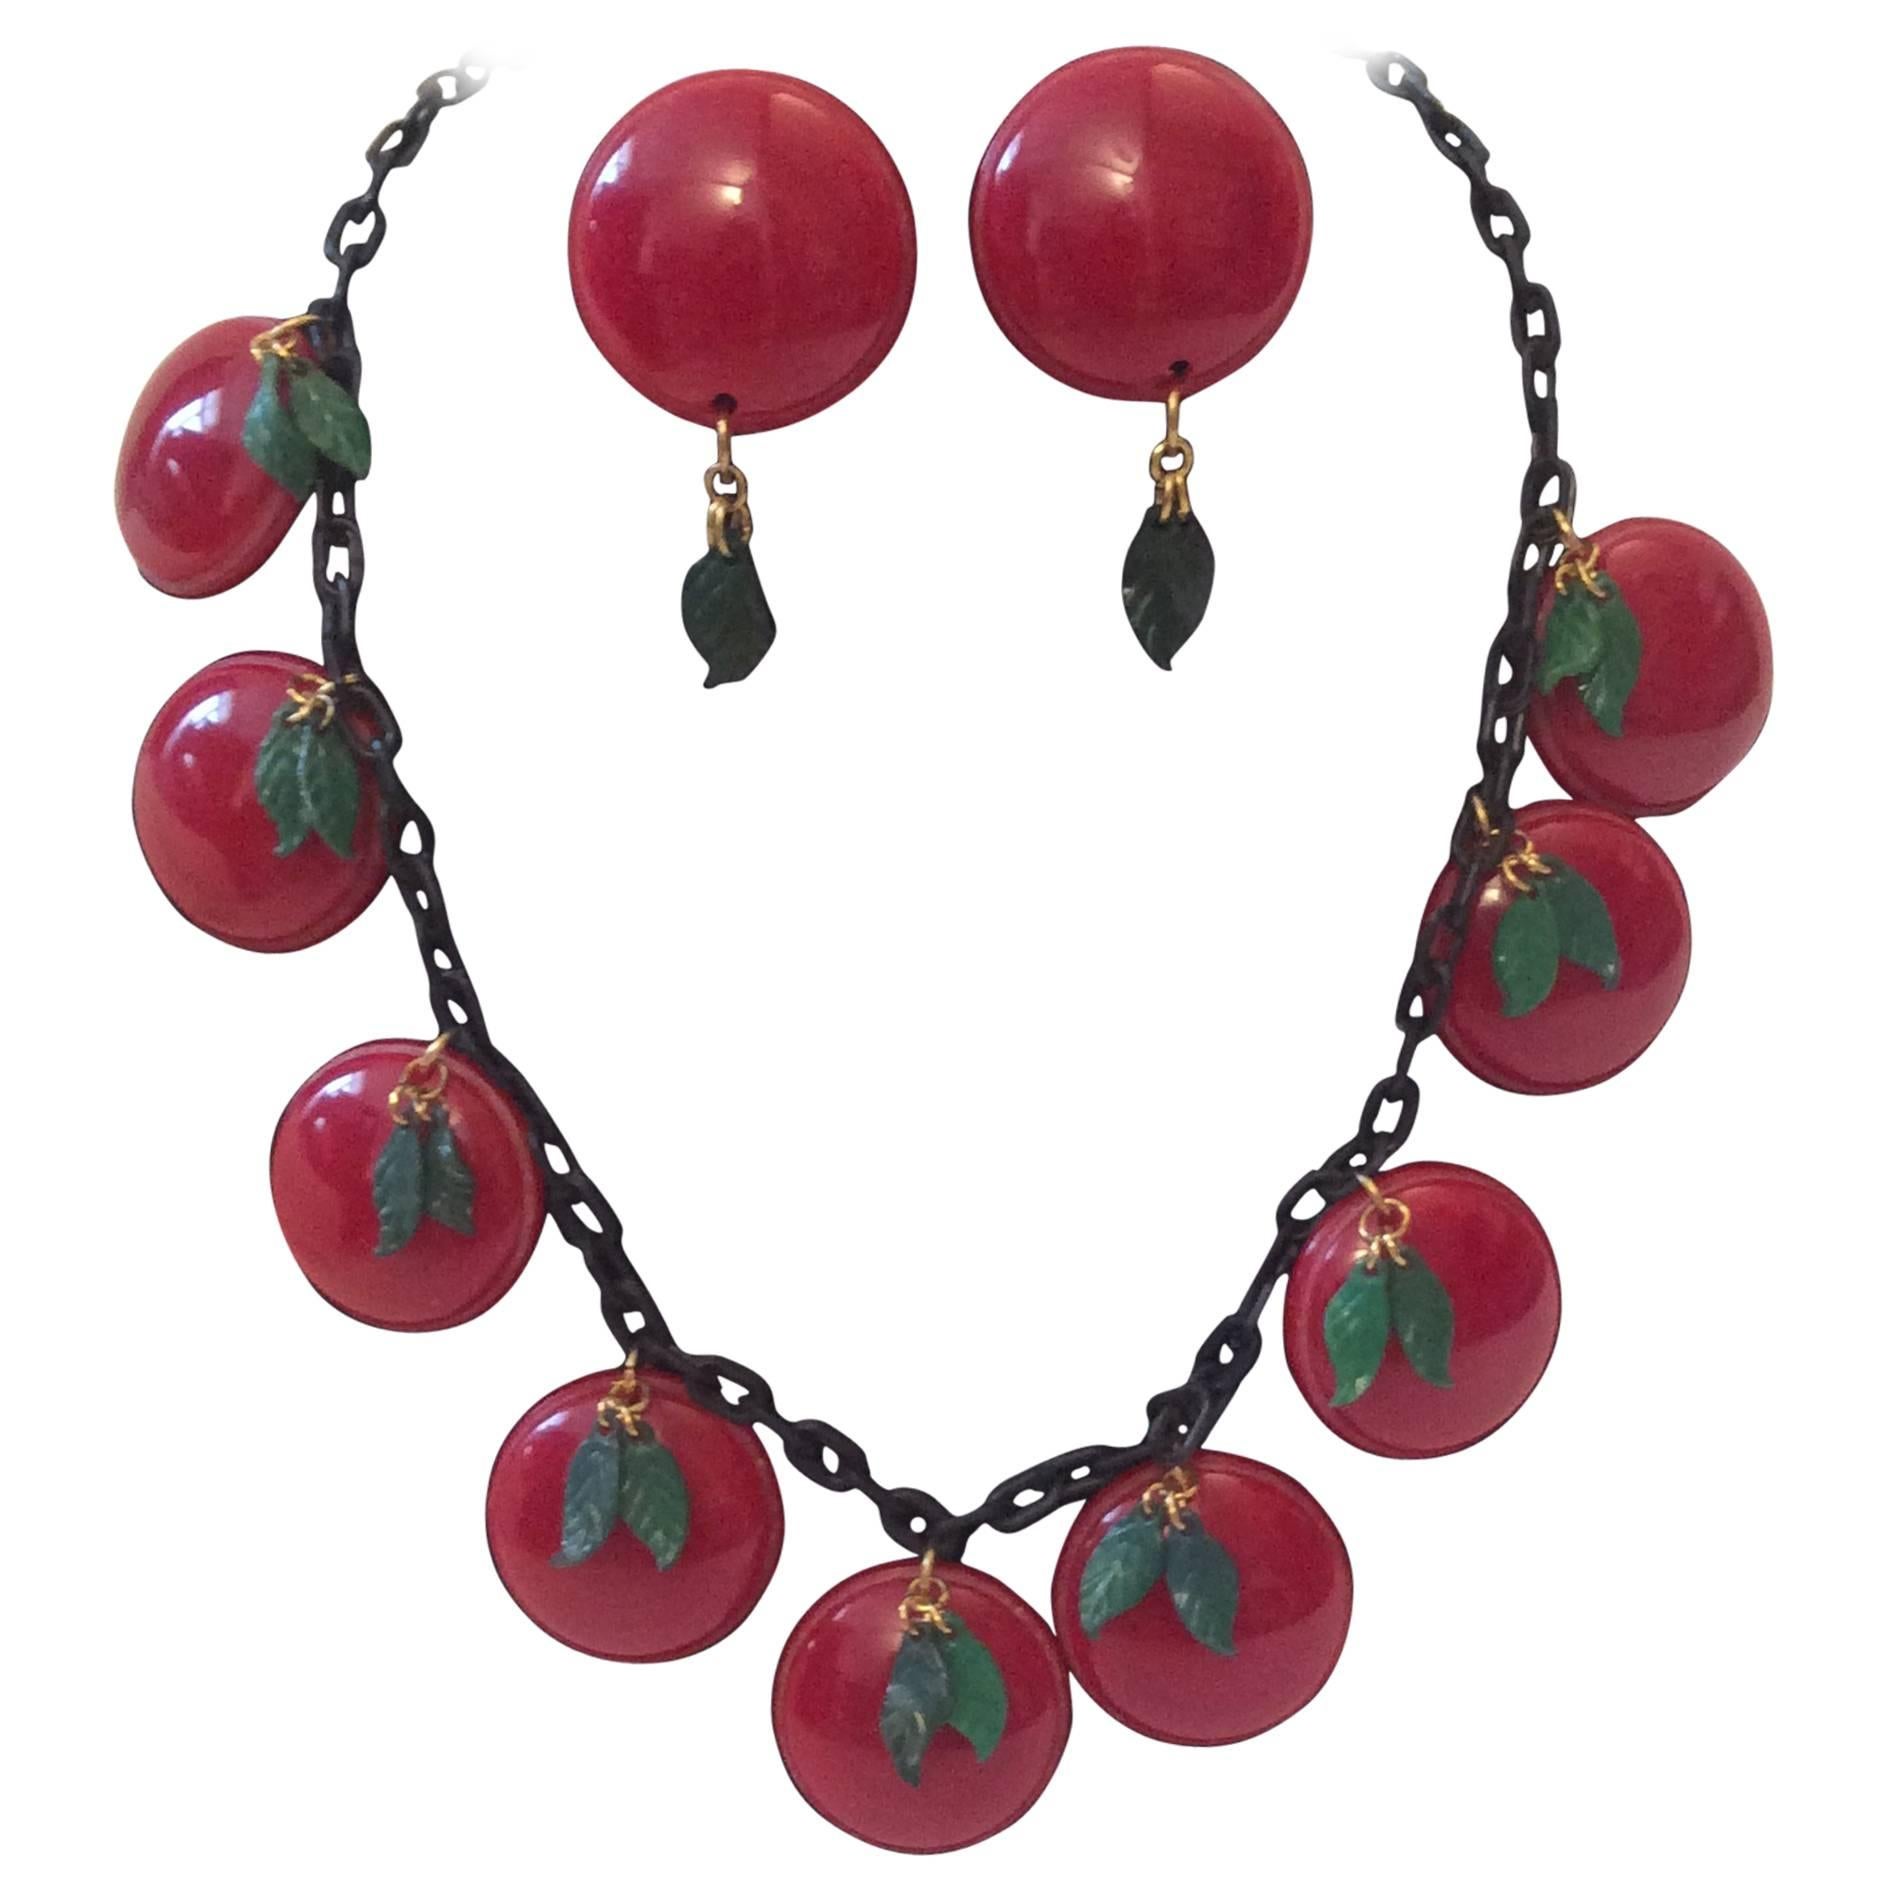  Bakelite Necklace Cherry with Matching Earrings For Sale